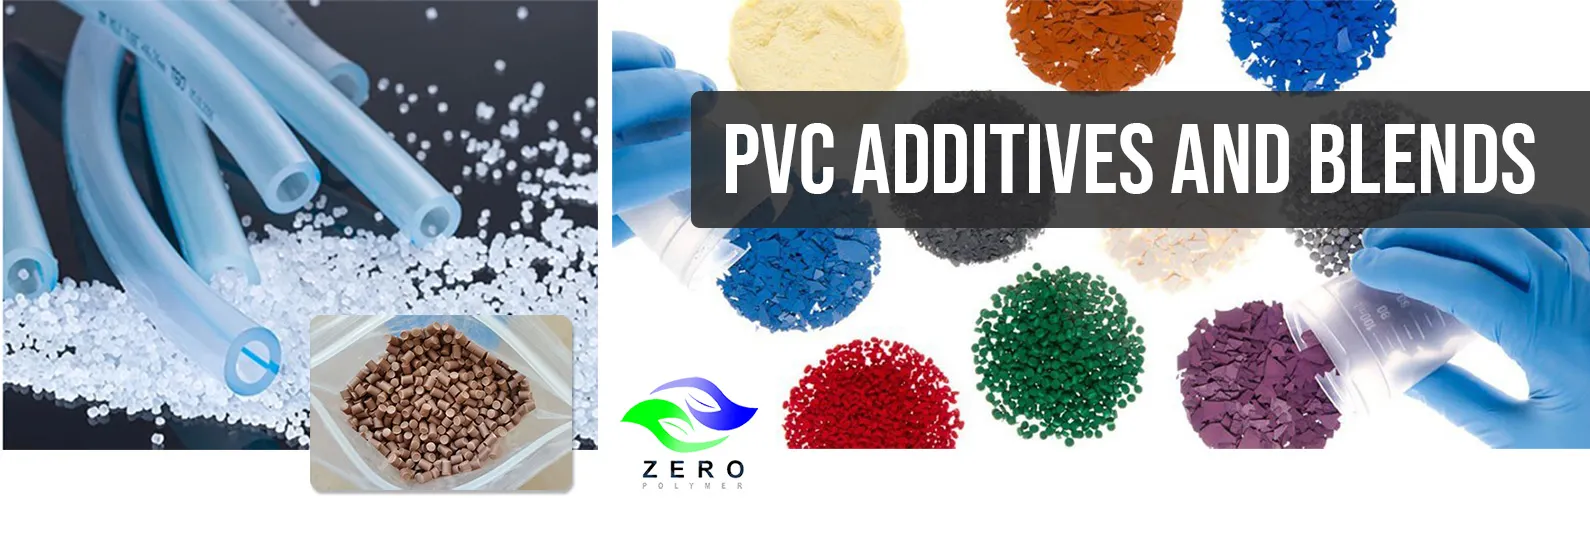 pvc additives and blends - zero polymer trading group